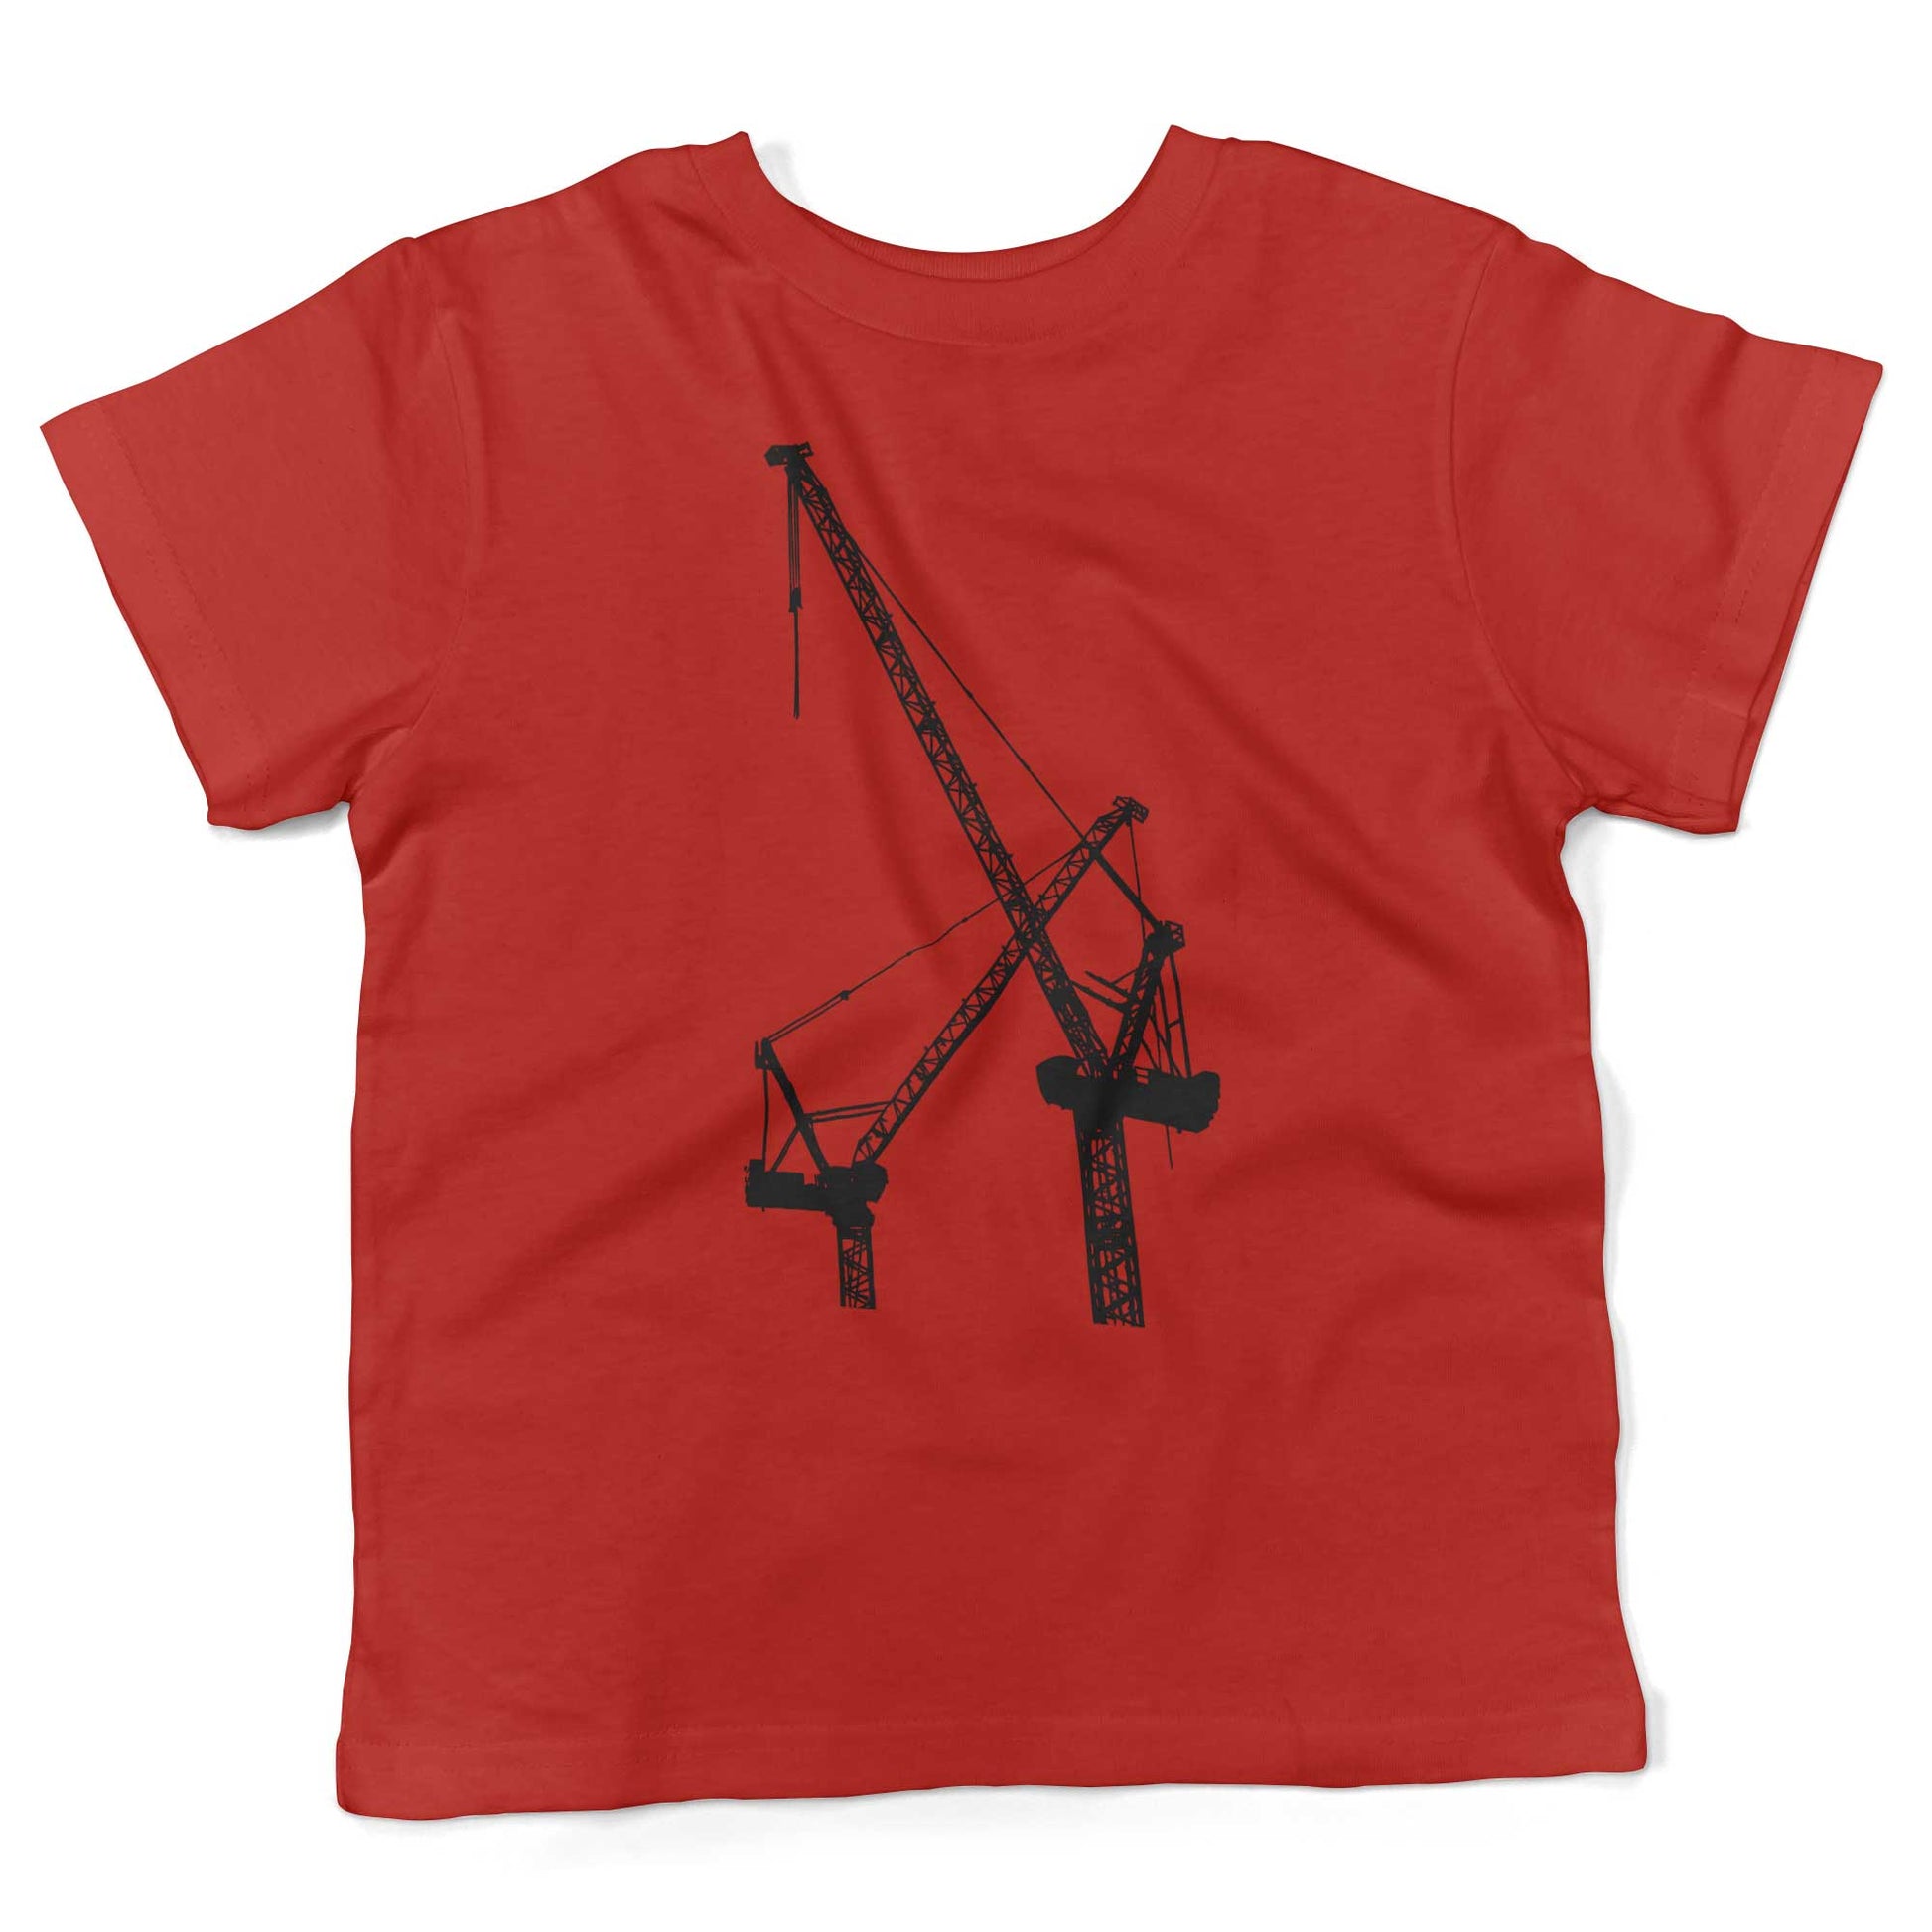 Construction Cranes Toddler Shirt-Red-2T